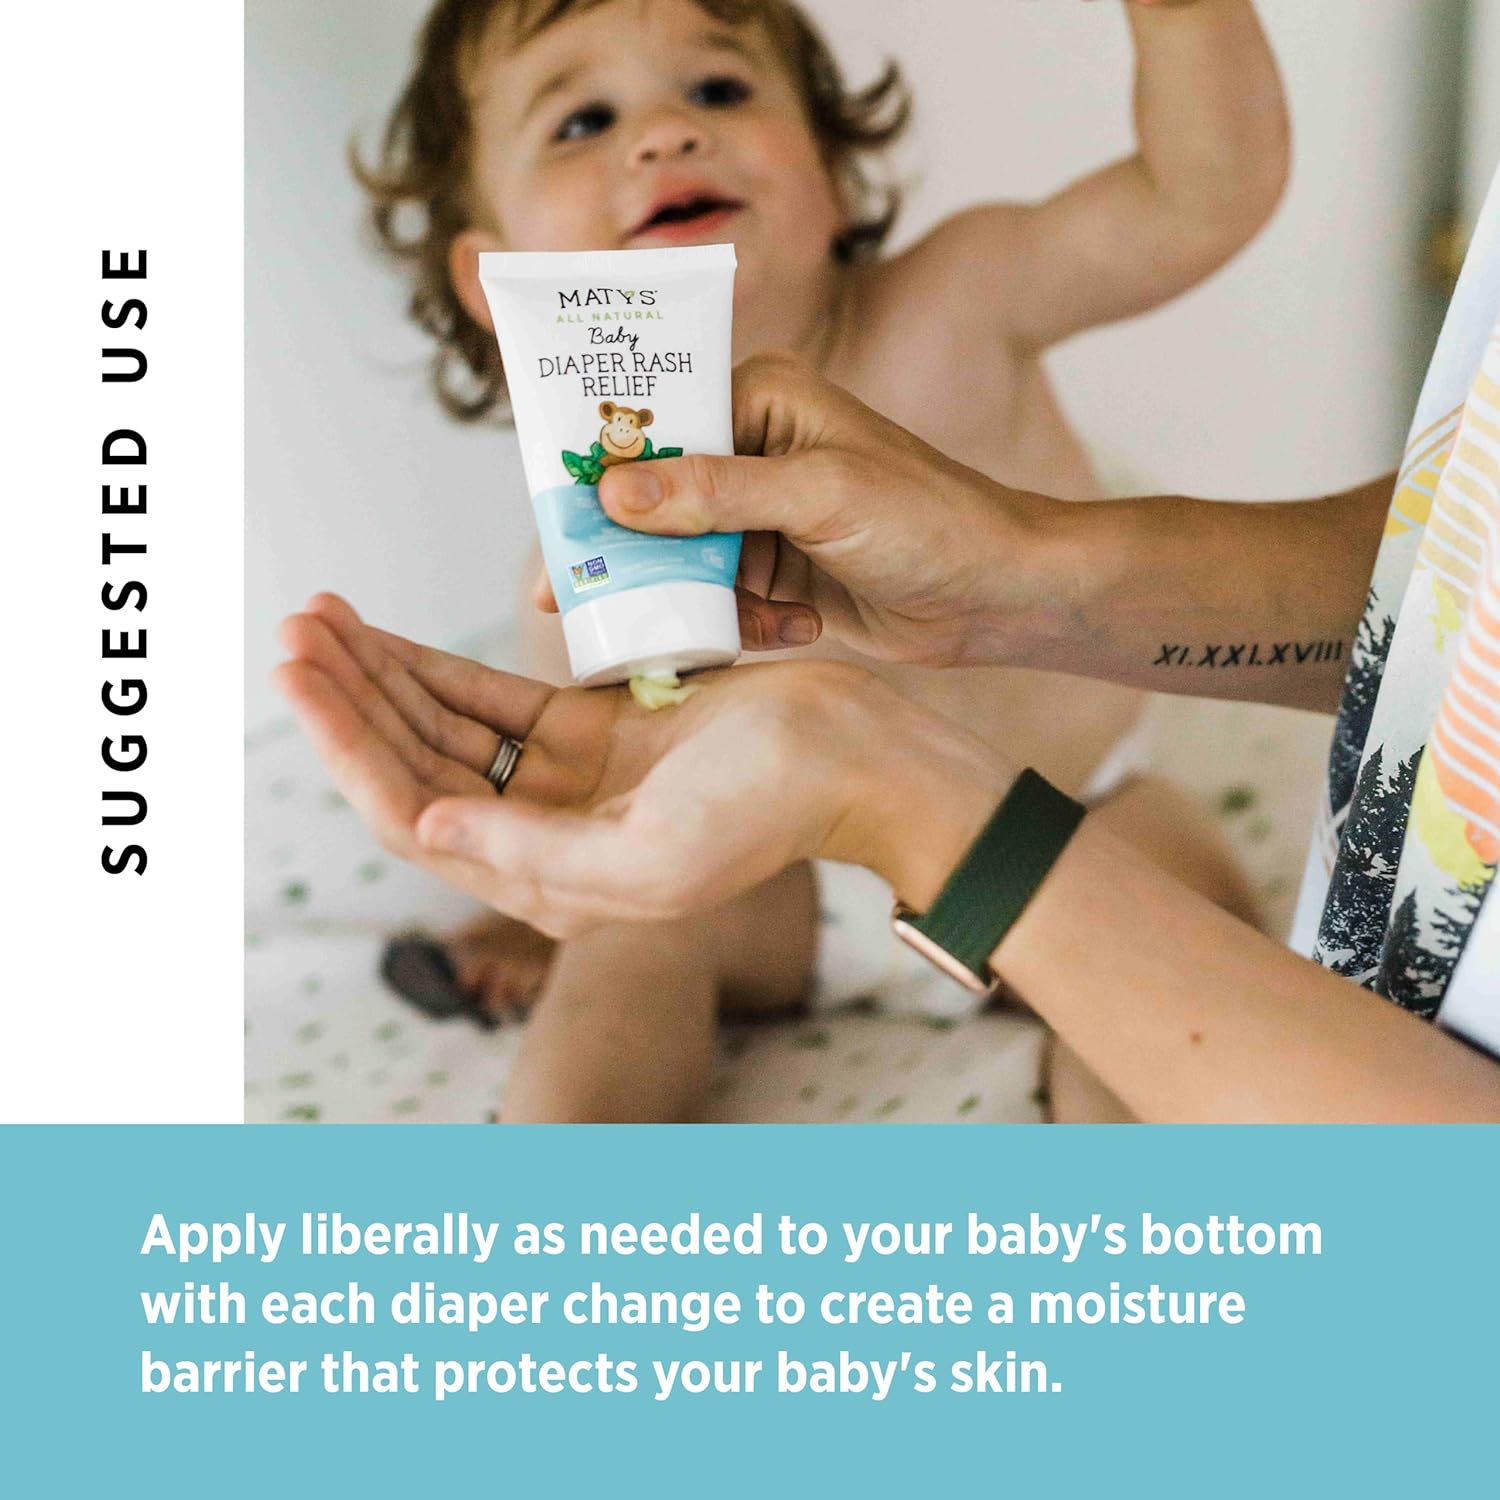 Matys Baby Diaper Rash Relief Ointment, Diaper Cream for Babies 2 Months Old +, Soothing Balm Protection for Chafed Skin, Clean Nurturing Lavender & Aloe w/Zinc, Petroleum Free, 2 Pack, 3.75 oz each : Baby